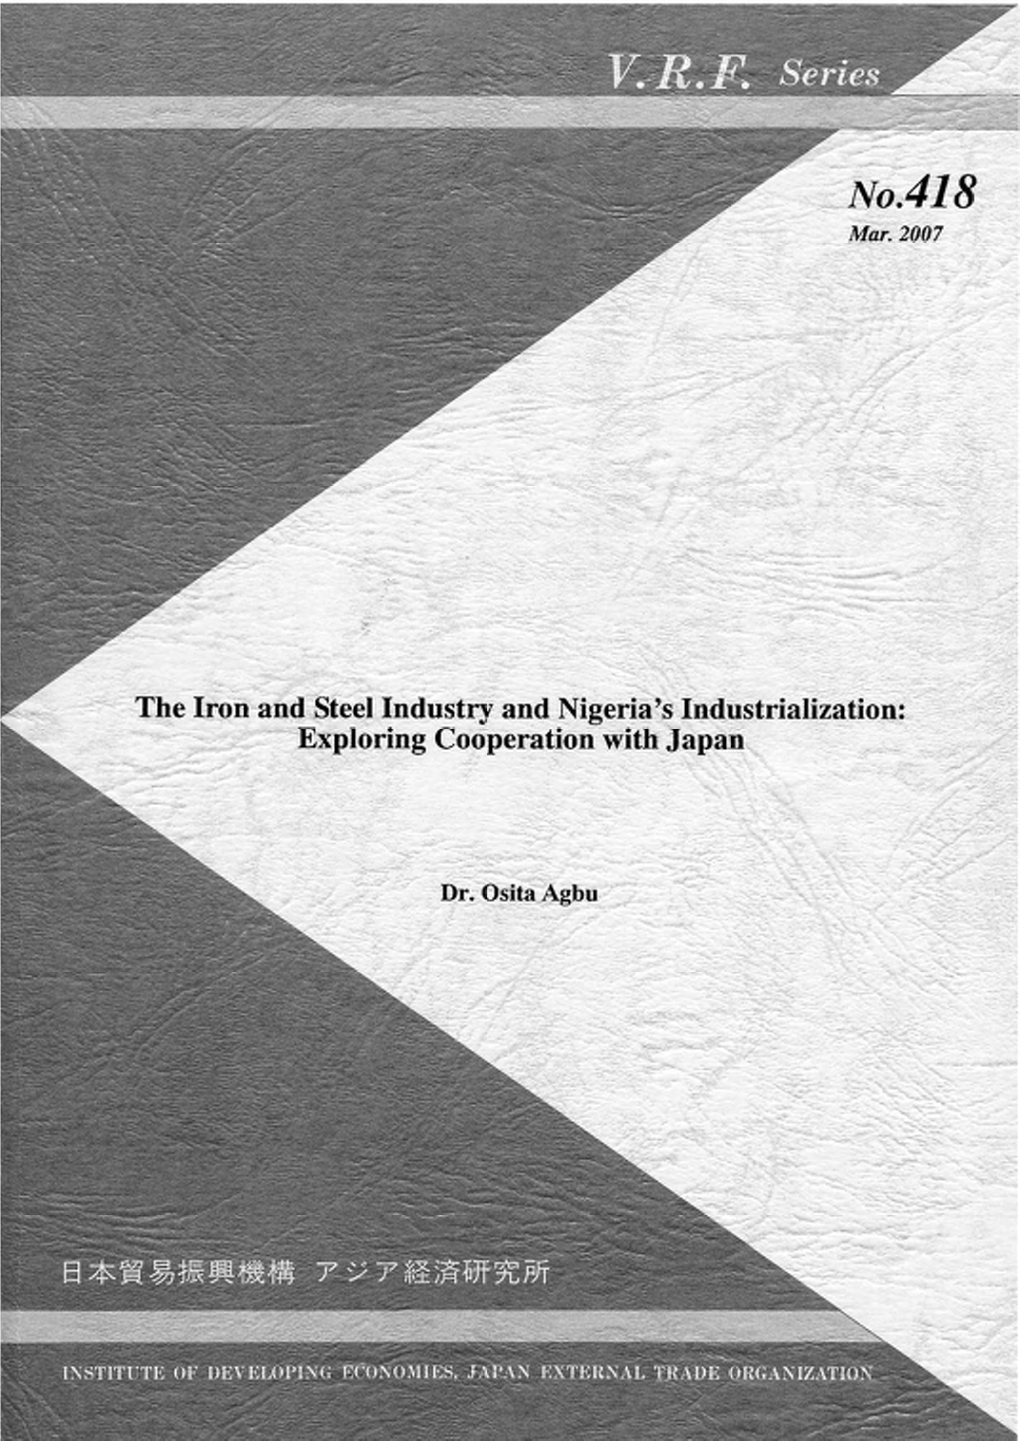 The Iron and Steel Industry and Nigeria's Industrialization: Exploring